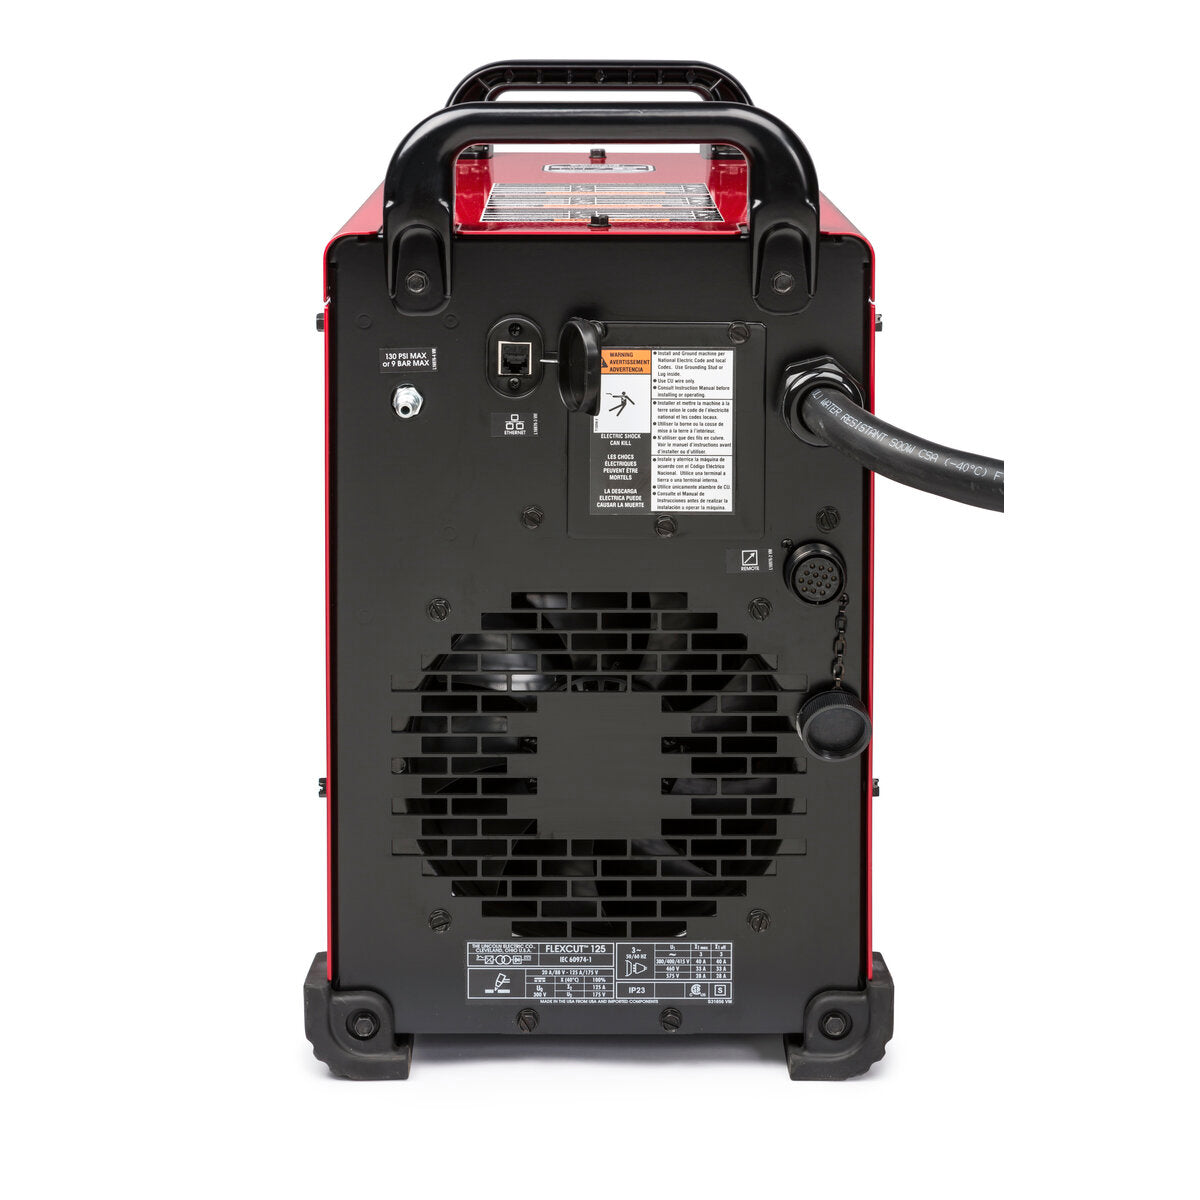 Lincoln Electric - FlexCut® 125 Plasma Cutter ( PS Only) - K4811-1